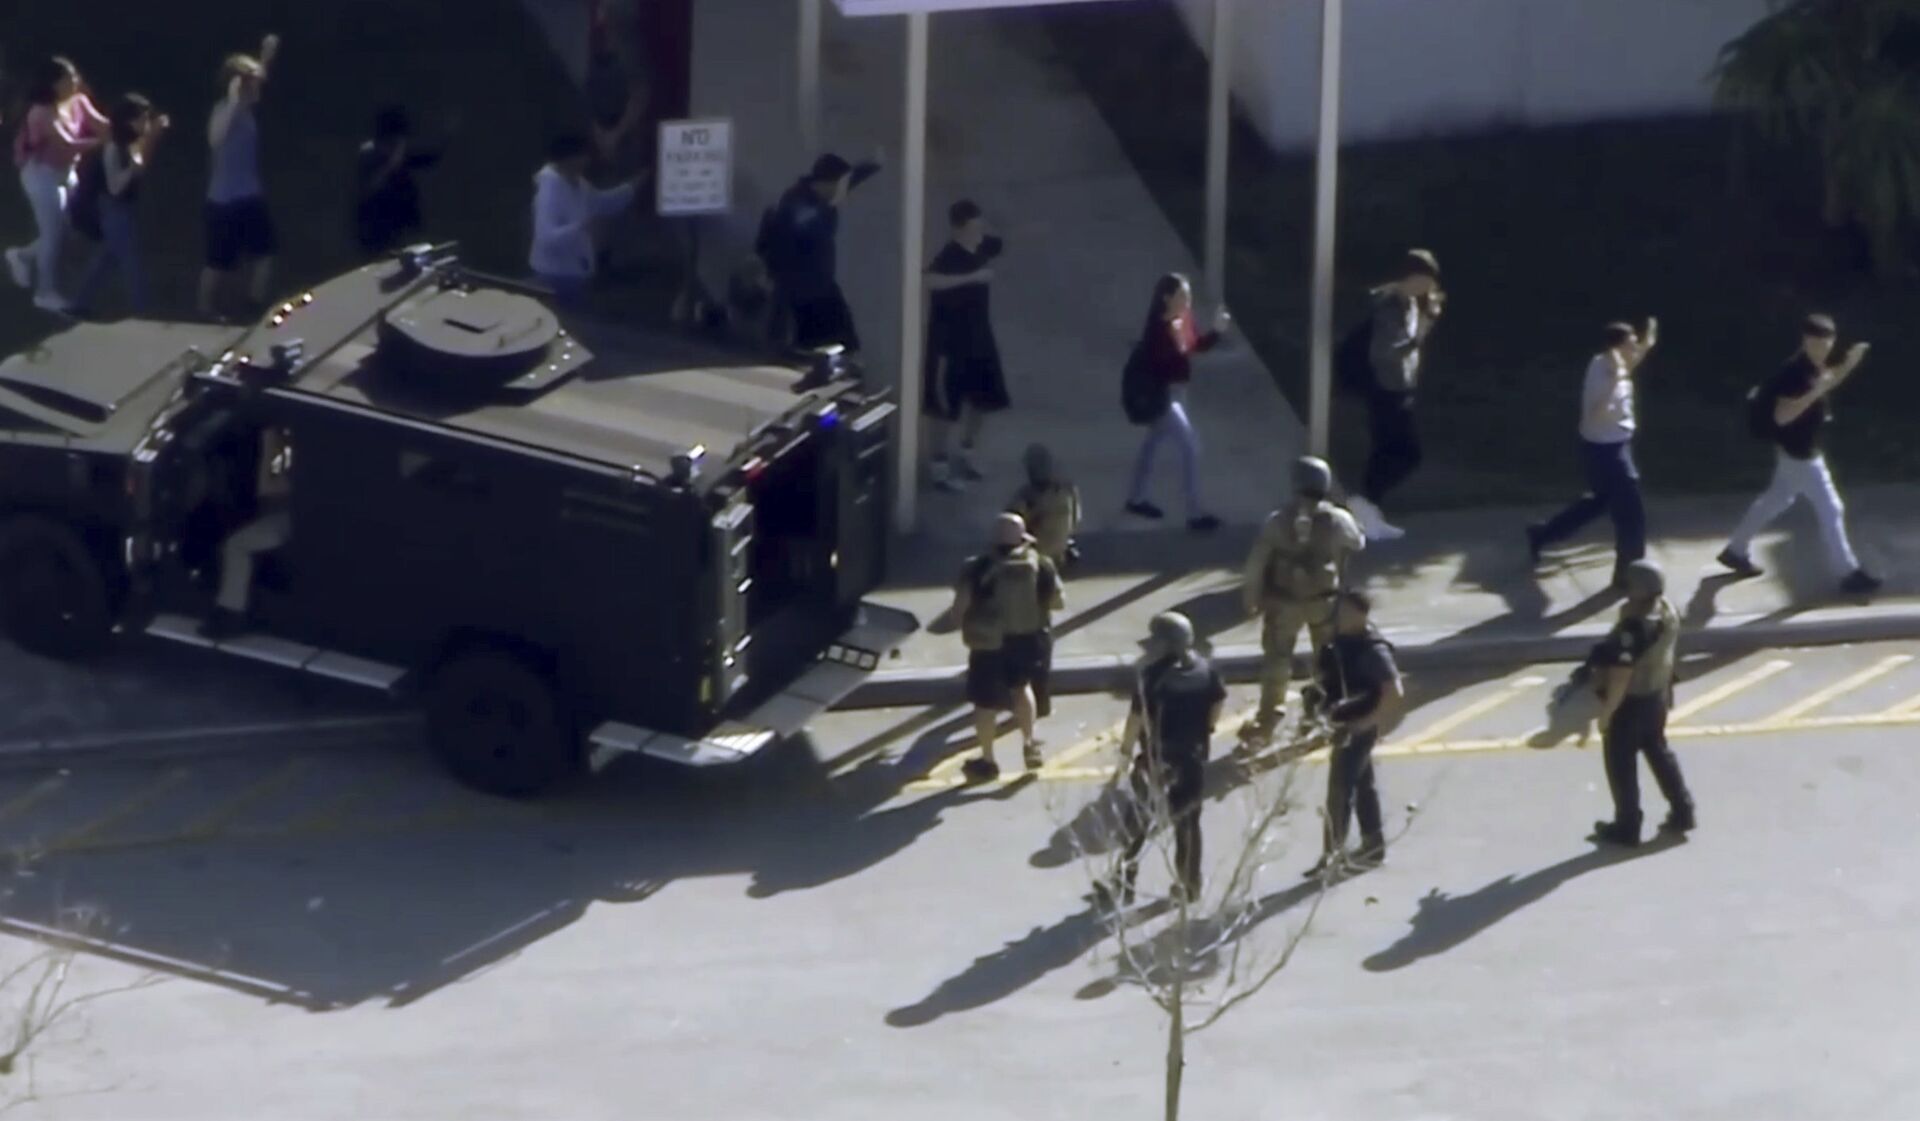 In this frame grab from video provided by WPLG-TV, students from the Marjory Stoneman Douglas High School in Parkland, Fla., evacuate the school following a shooting, Wednesday, Feb. 14, 2018.  - Sputnik International, 1920, 13.09.2021